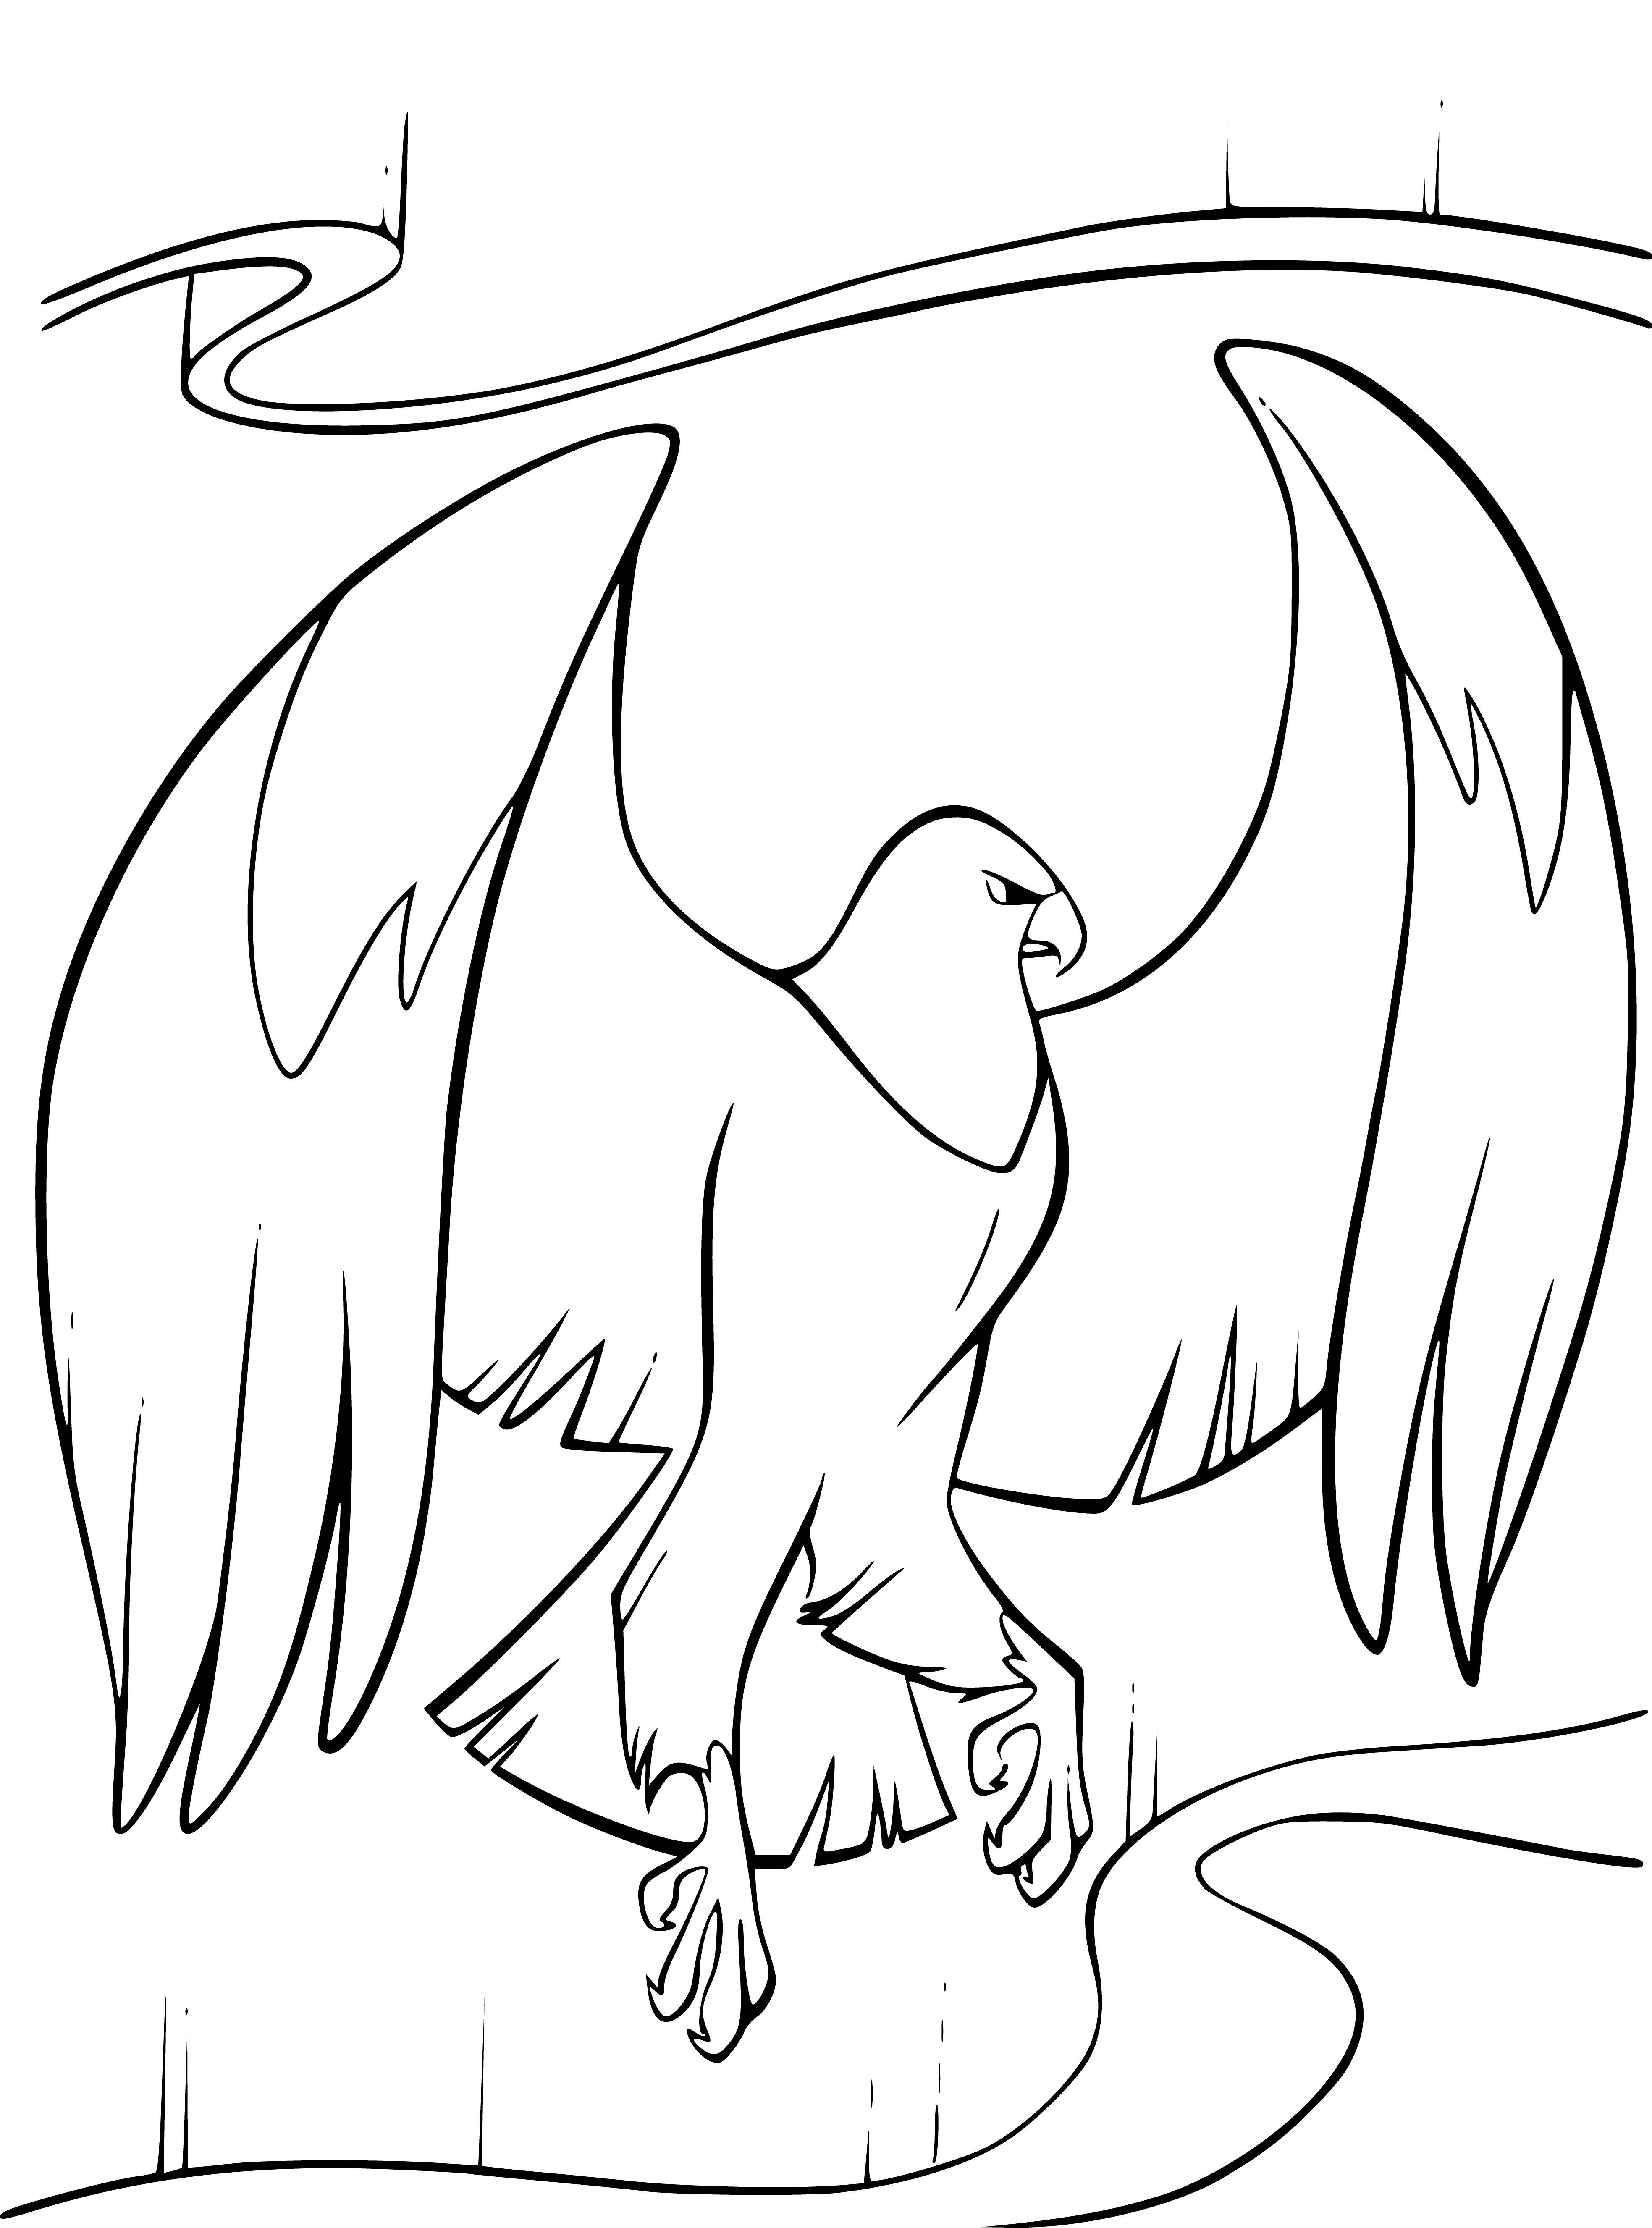 coloring page: Brother bear has a white eagle perched on his shoulder, looks up at it calmly. Wings spread, talons dug into fur.